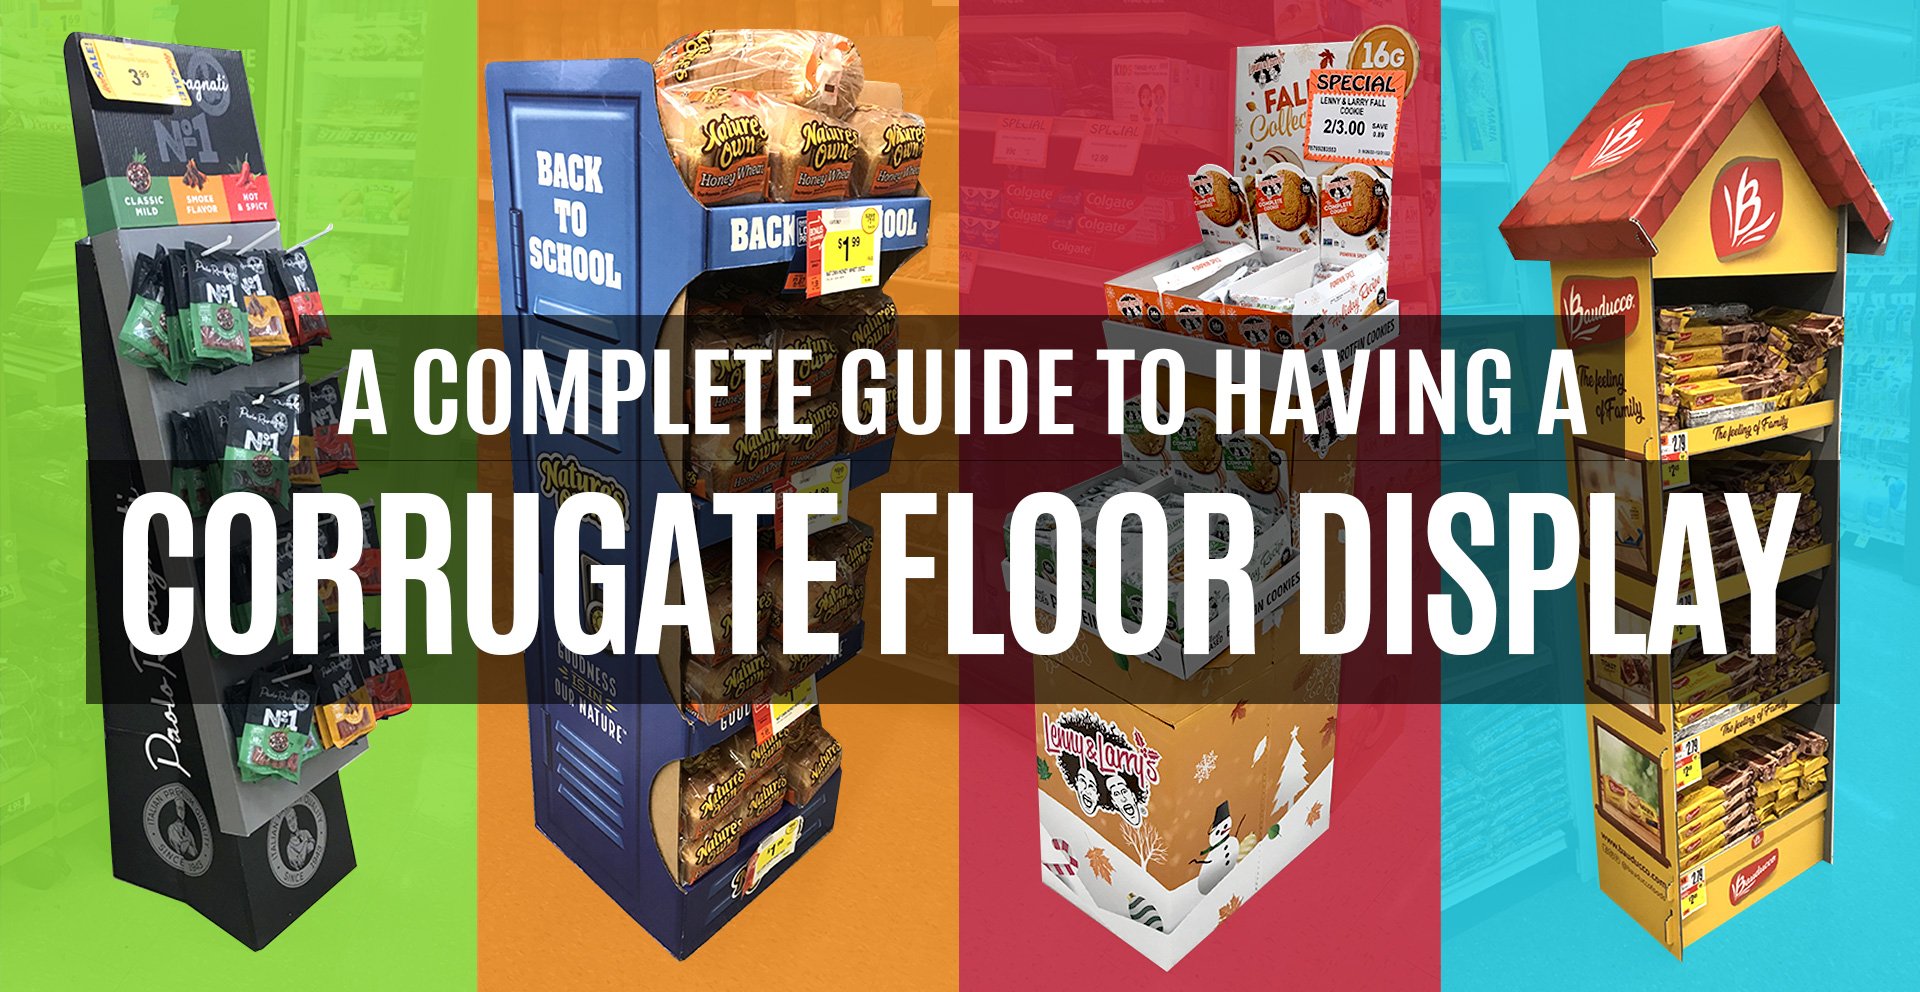 Guide-To-Corrugater-Floor-Display